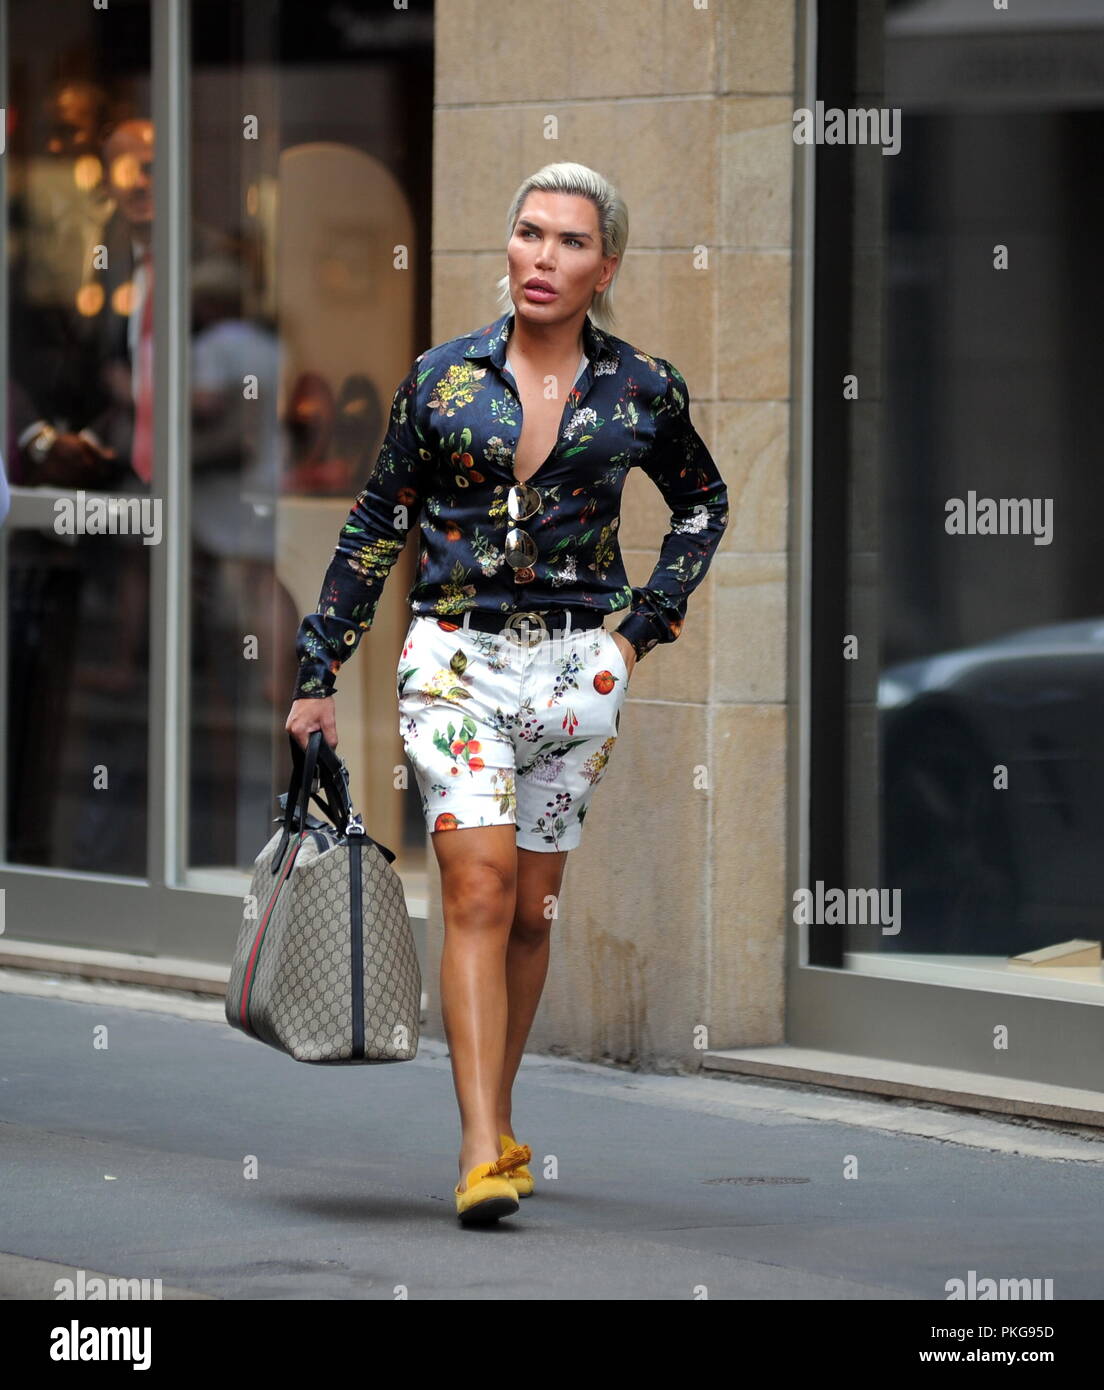 https://c8.alamy.com/comp/PKG95D/milan-italy-13th-september-2018-milan-rodrigo-alves-arrives-in-the-center-rodrigo-alves-the-human-ken-known-to-the-general-public-for-having-undergone-many-plastic-surgery-throughout-the-body-arrives-in-the-center-and-after-having-lunched-by-caruso-fuori-a-famous-restaurant-via-manzoni-goes-to-get-a-haircut-from-his-hairdresser-in-via-montenapoleone-then-decides-to-go-shopping-gucci-credit-independent-photo-agency-srlalamy-live-news-PKG95D.jpg